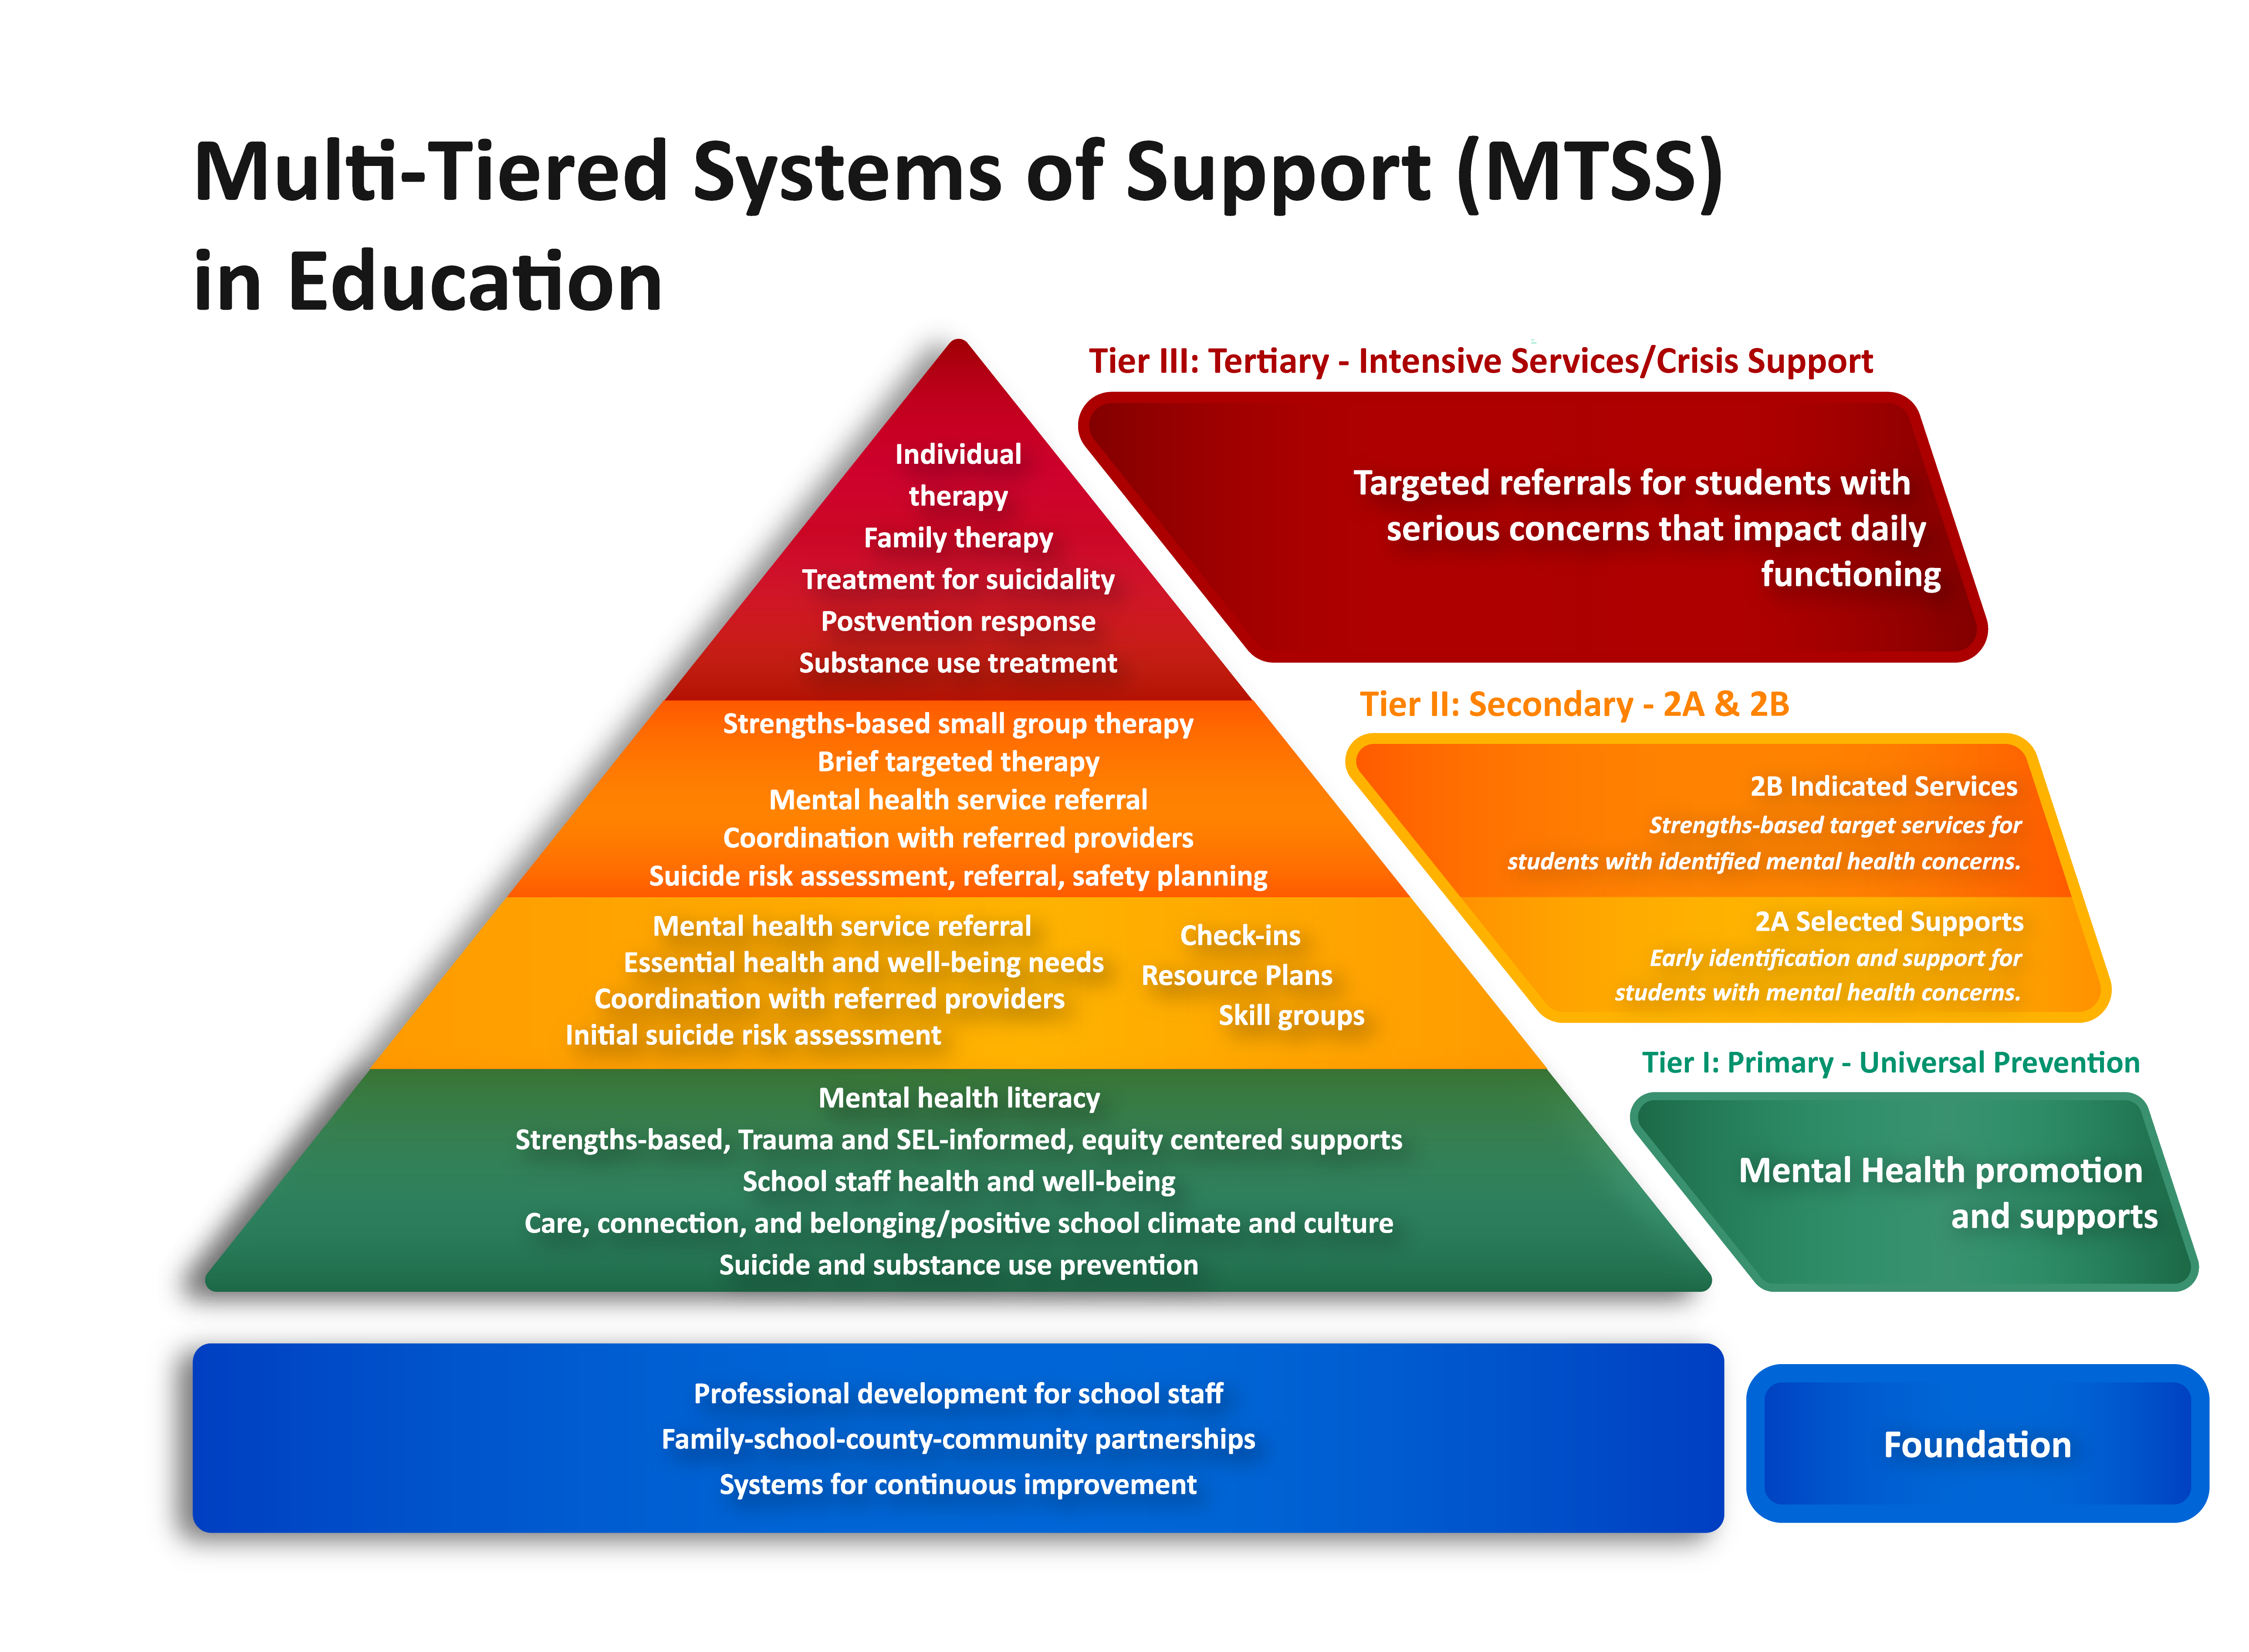 Oregon Department of Education MultiTiered Systems of Support (MTSS